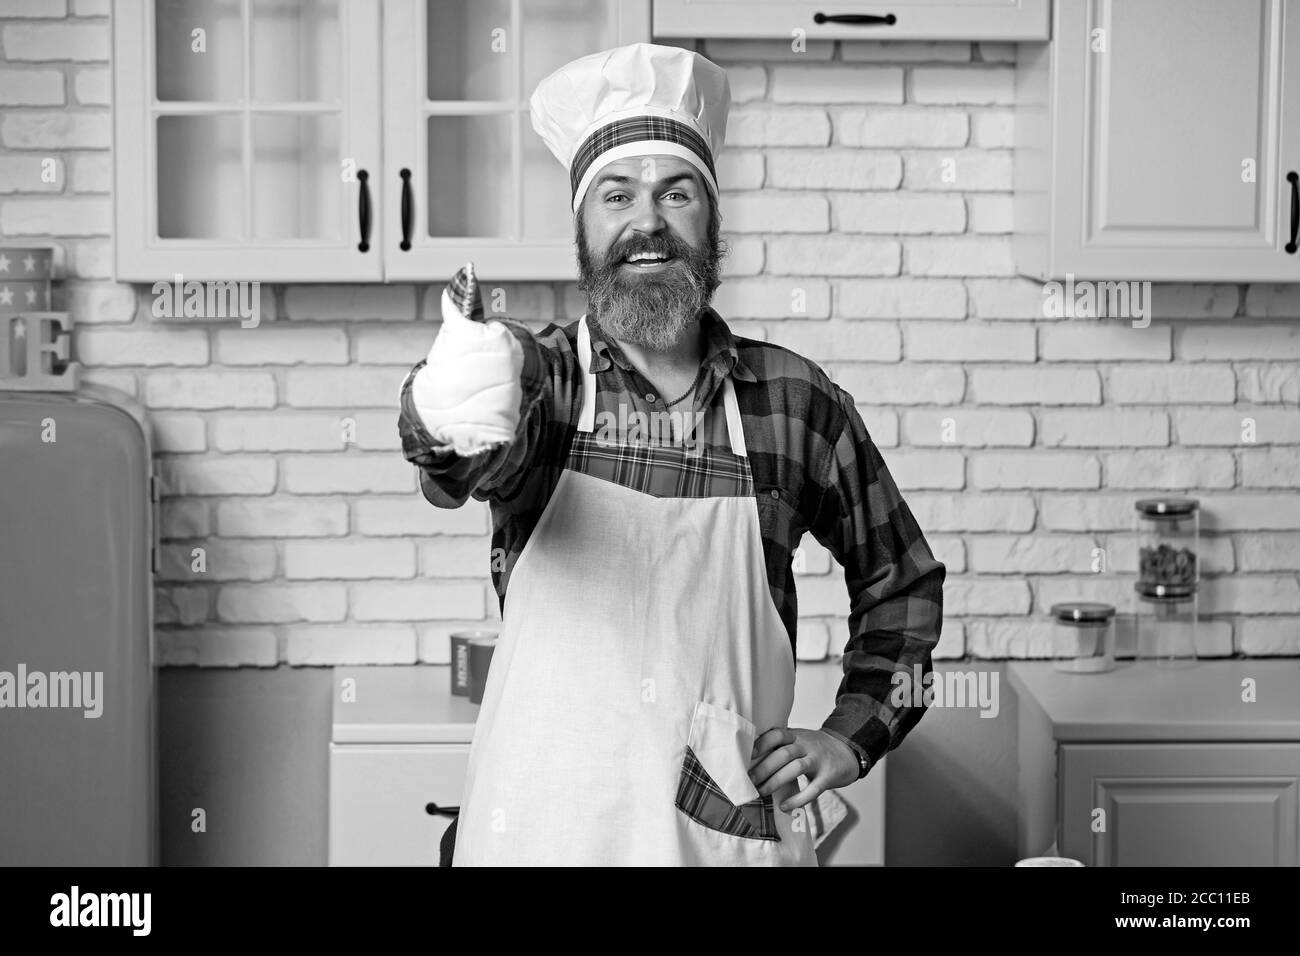 https://c8.alamy.com/comp/2CC11EB/bearded-chef-cook-baker-gesturing-excellent-chef-in-white-hat-and-apron-with-perfect-sign-2CC11EB.jpg